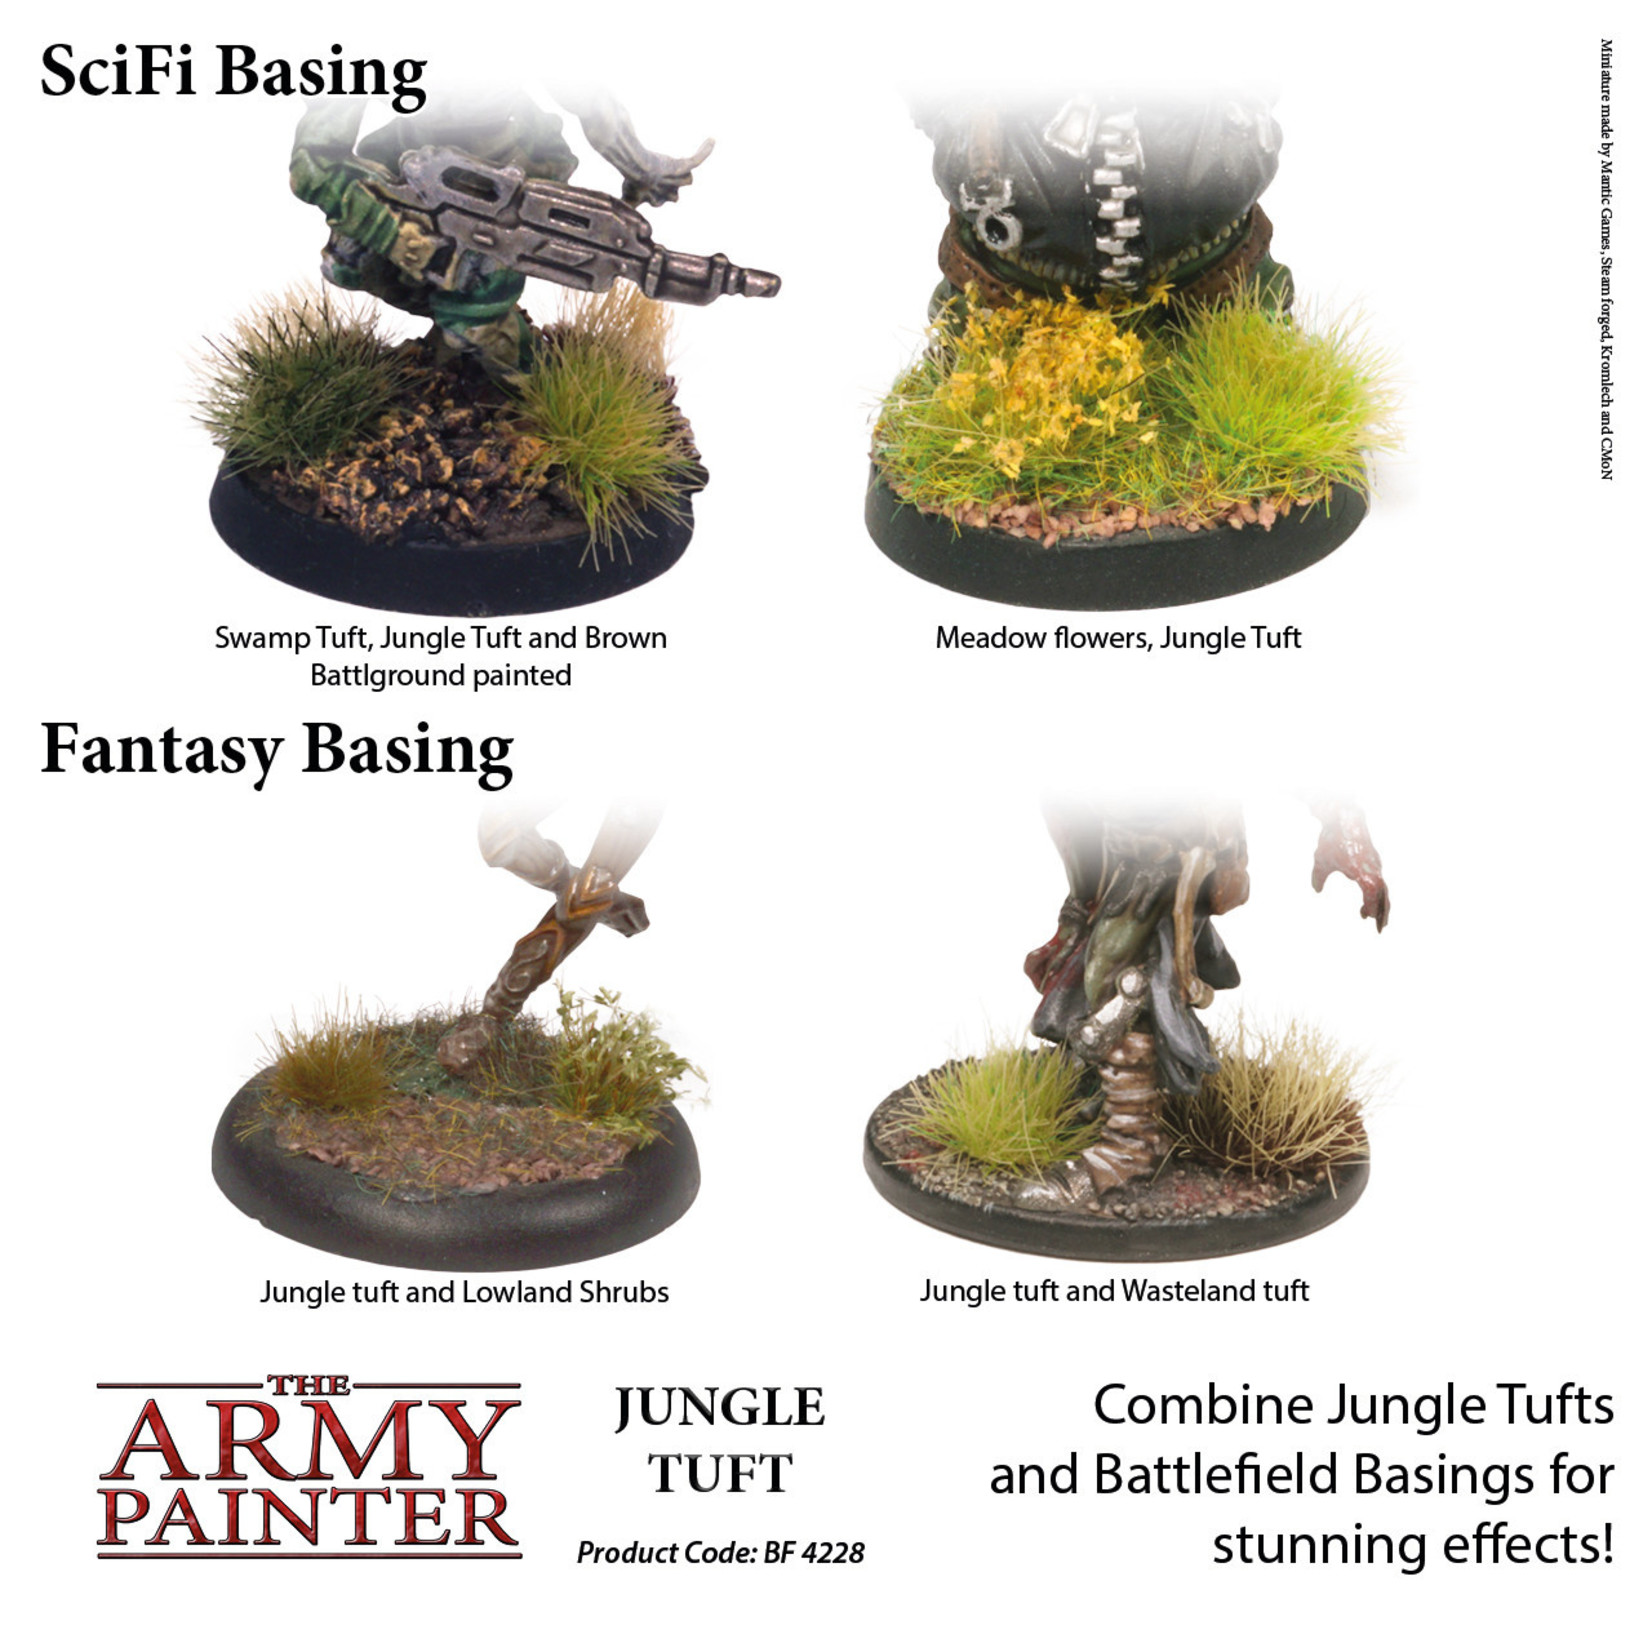 The Army Painter Battlefields: Jungle Tuft